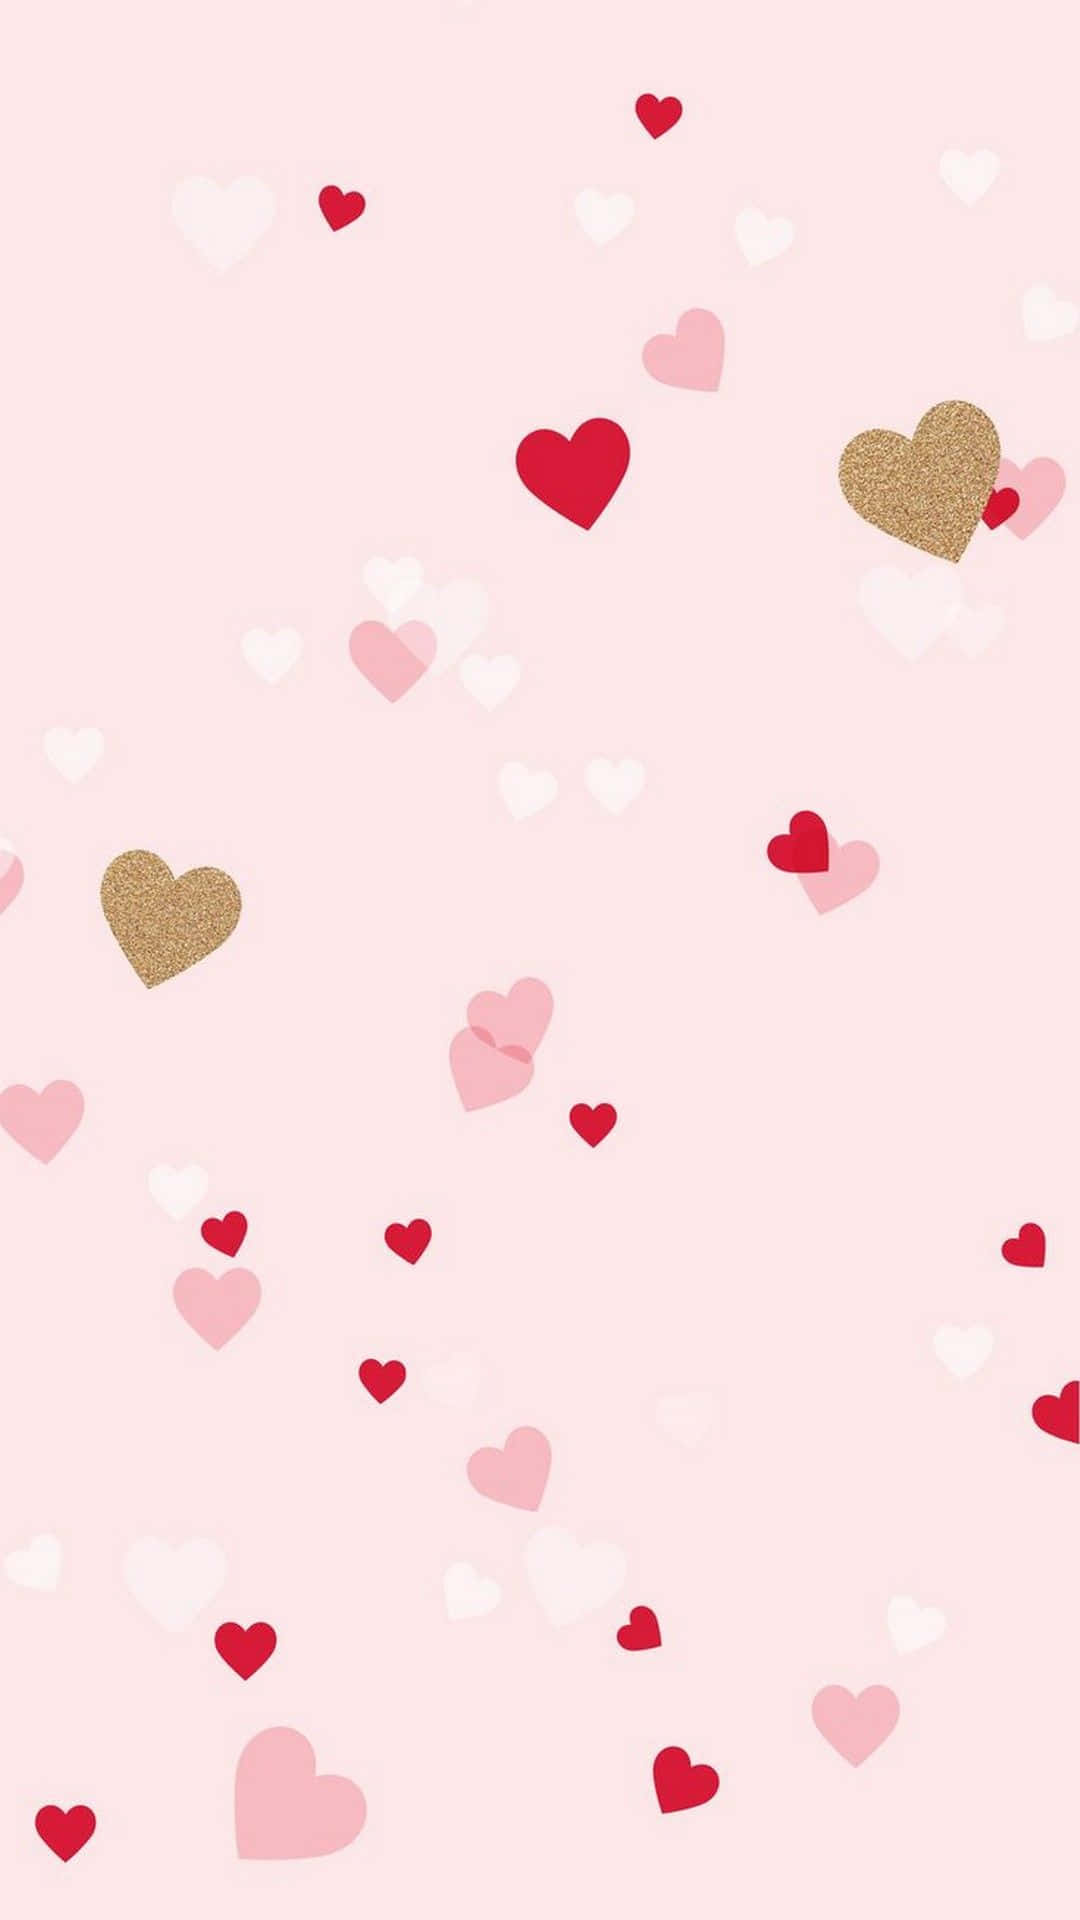 Show your Valentine some love this year with a touch of cuteness. Wallpaper